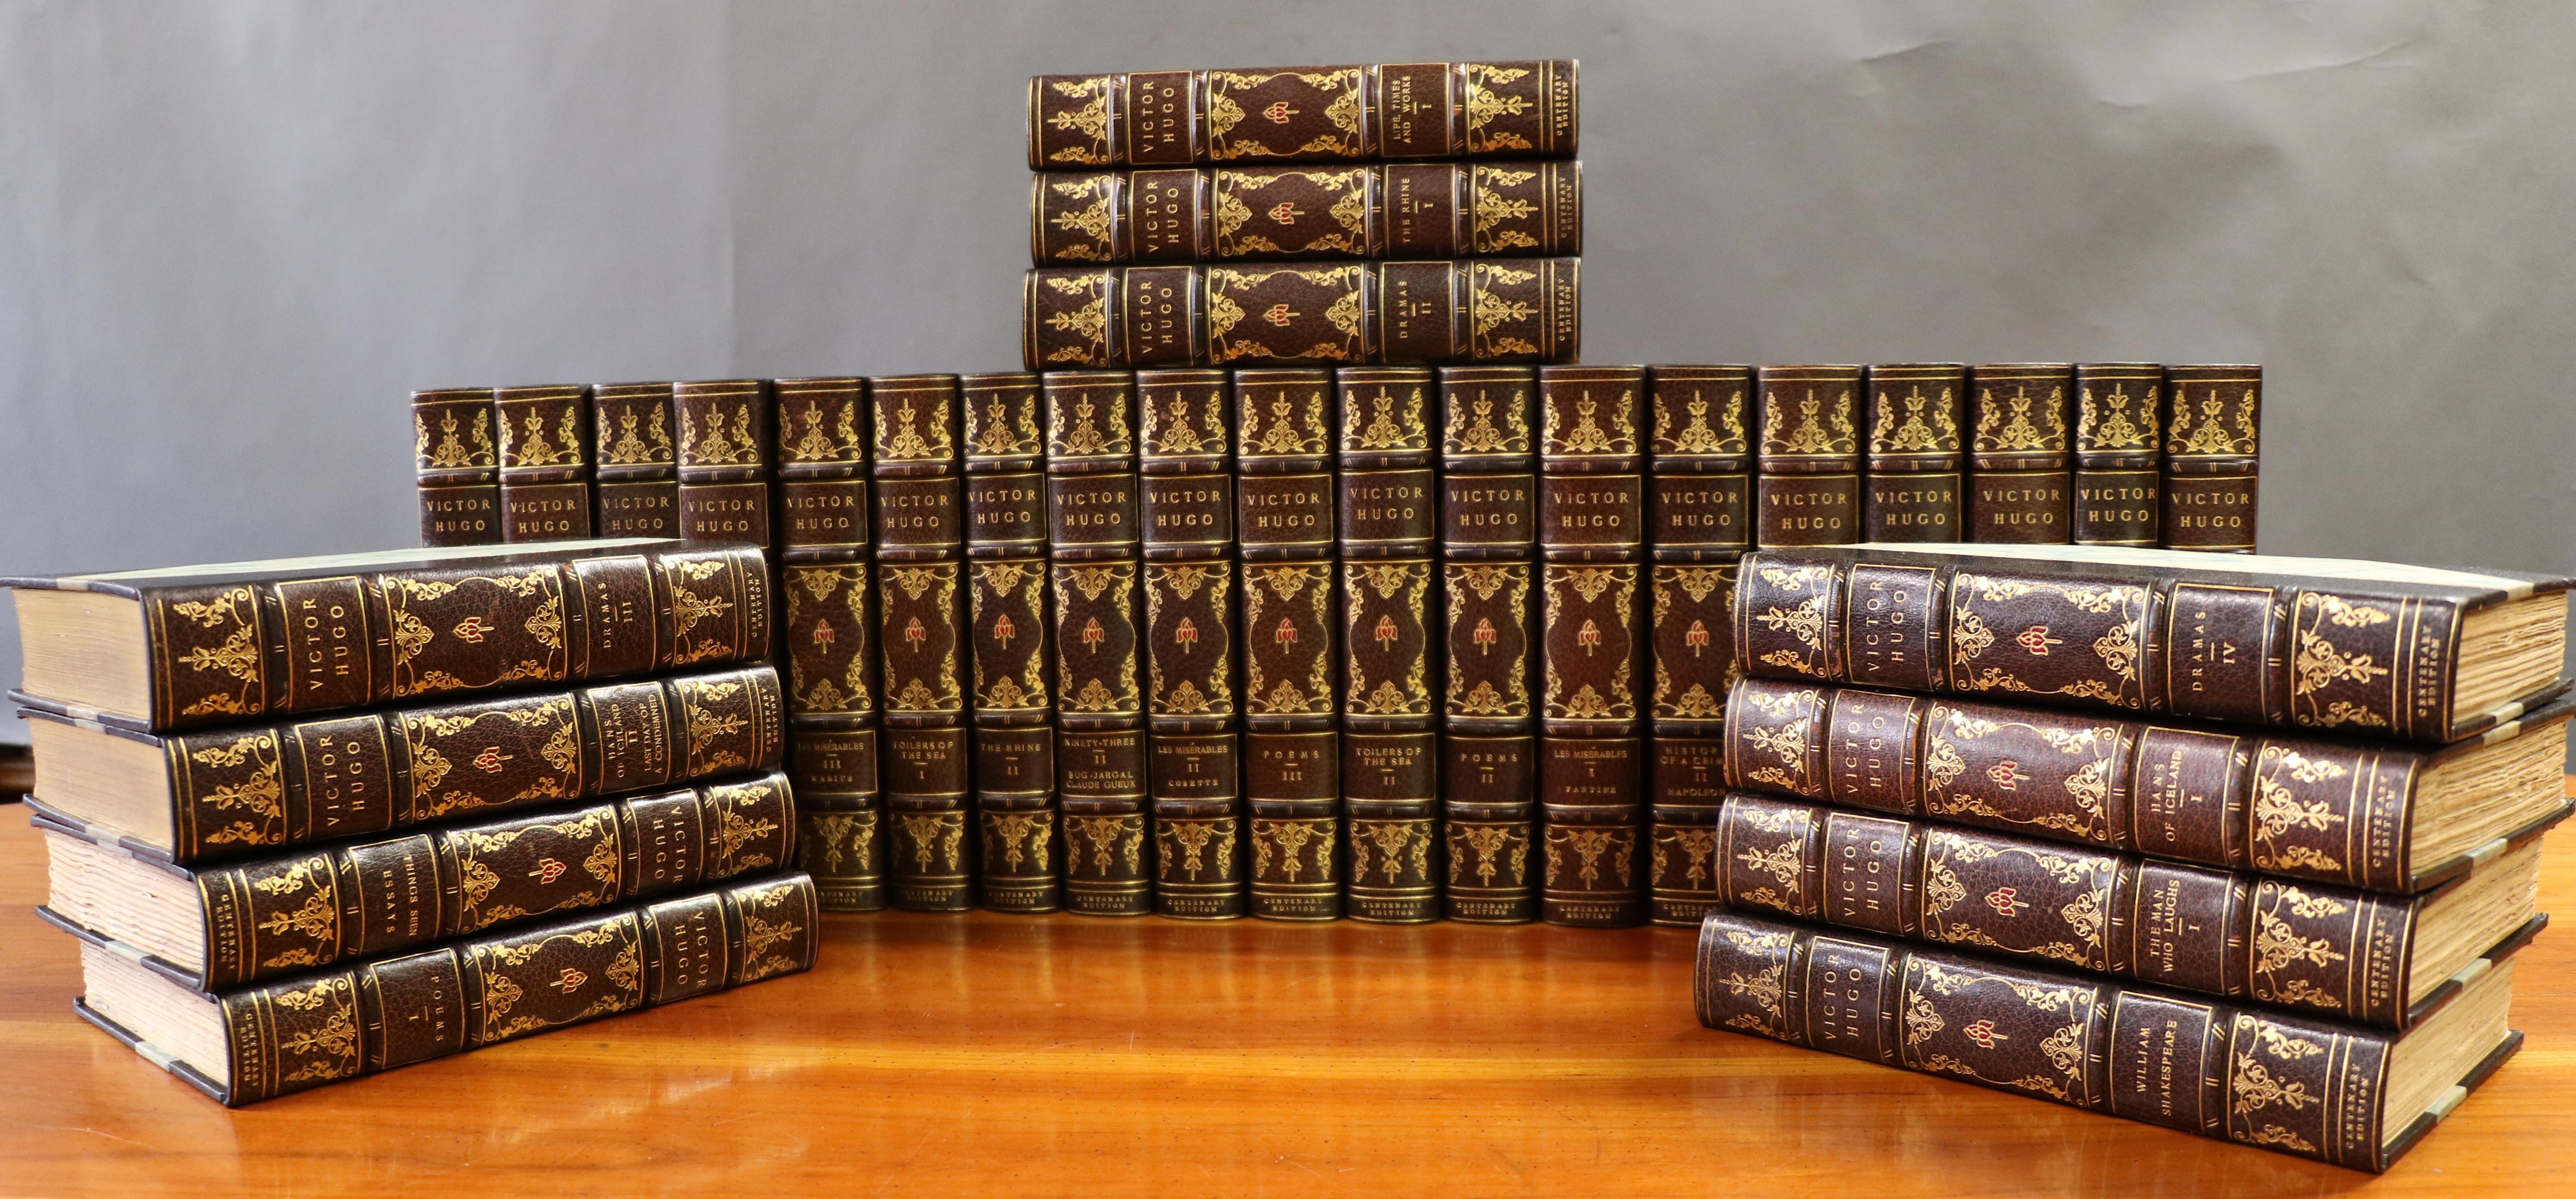 Victor Hugo novels, The Centenary Edition, limited to 1000 copies, 30 volumes
Illustrated, bound in 3/4 wine Morocco, marbled boards, top edges gilt, raised bands, gilt tooling on spines.
Pub. Boston: Dana Estes & Co. n.d., circa 1900.